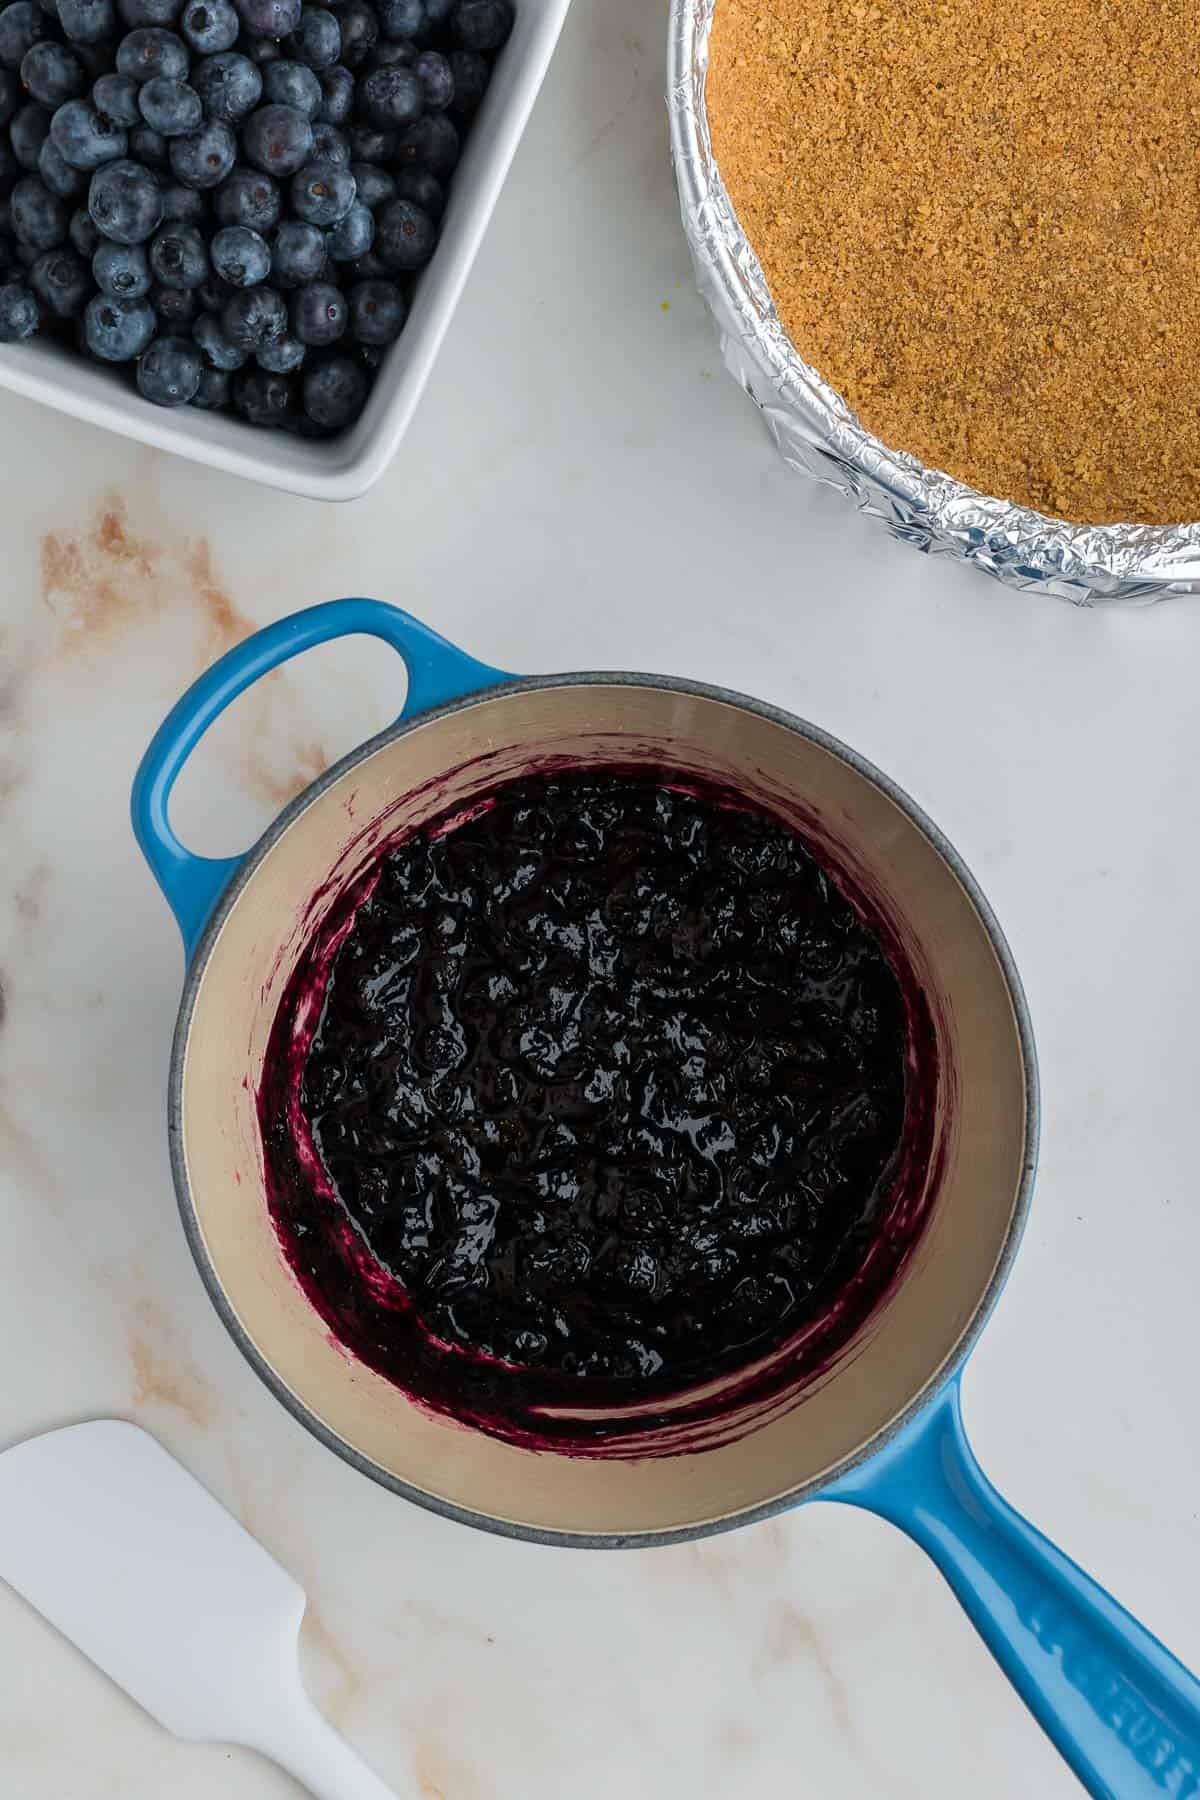 Finished blueberry compote in a blue saucepan.